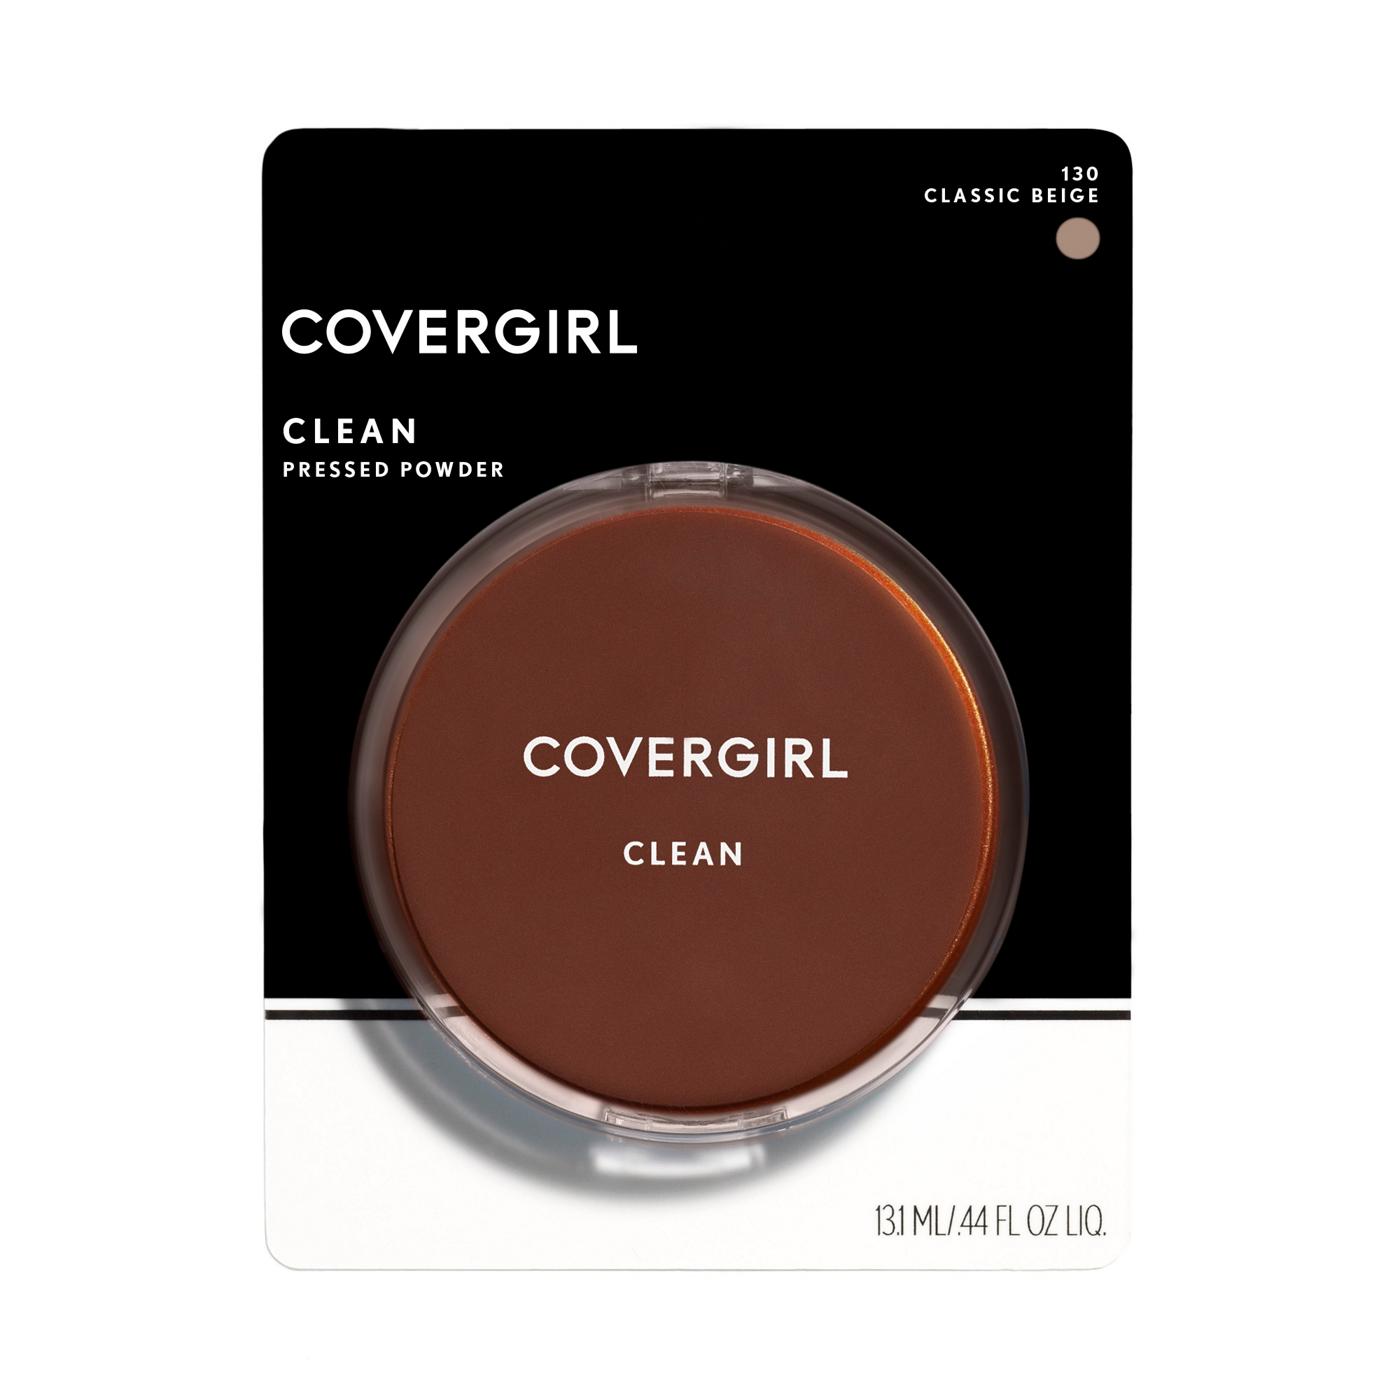 Covergirl Clean Pressed Powder 130 Classic Beige; image 1 of 4